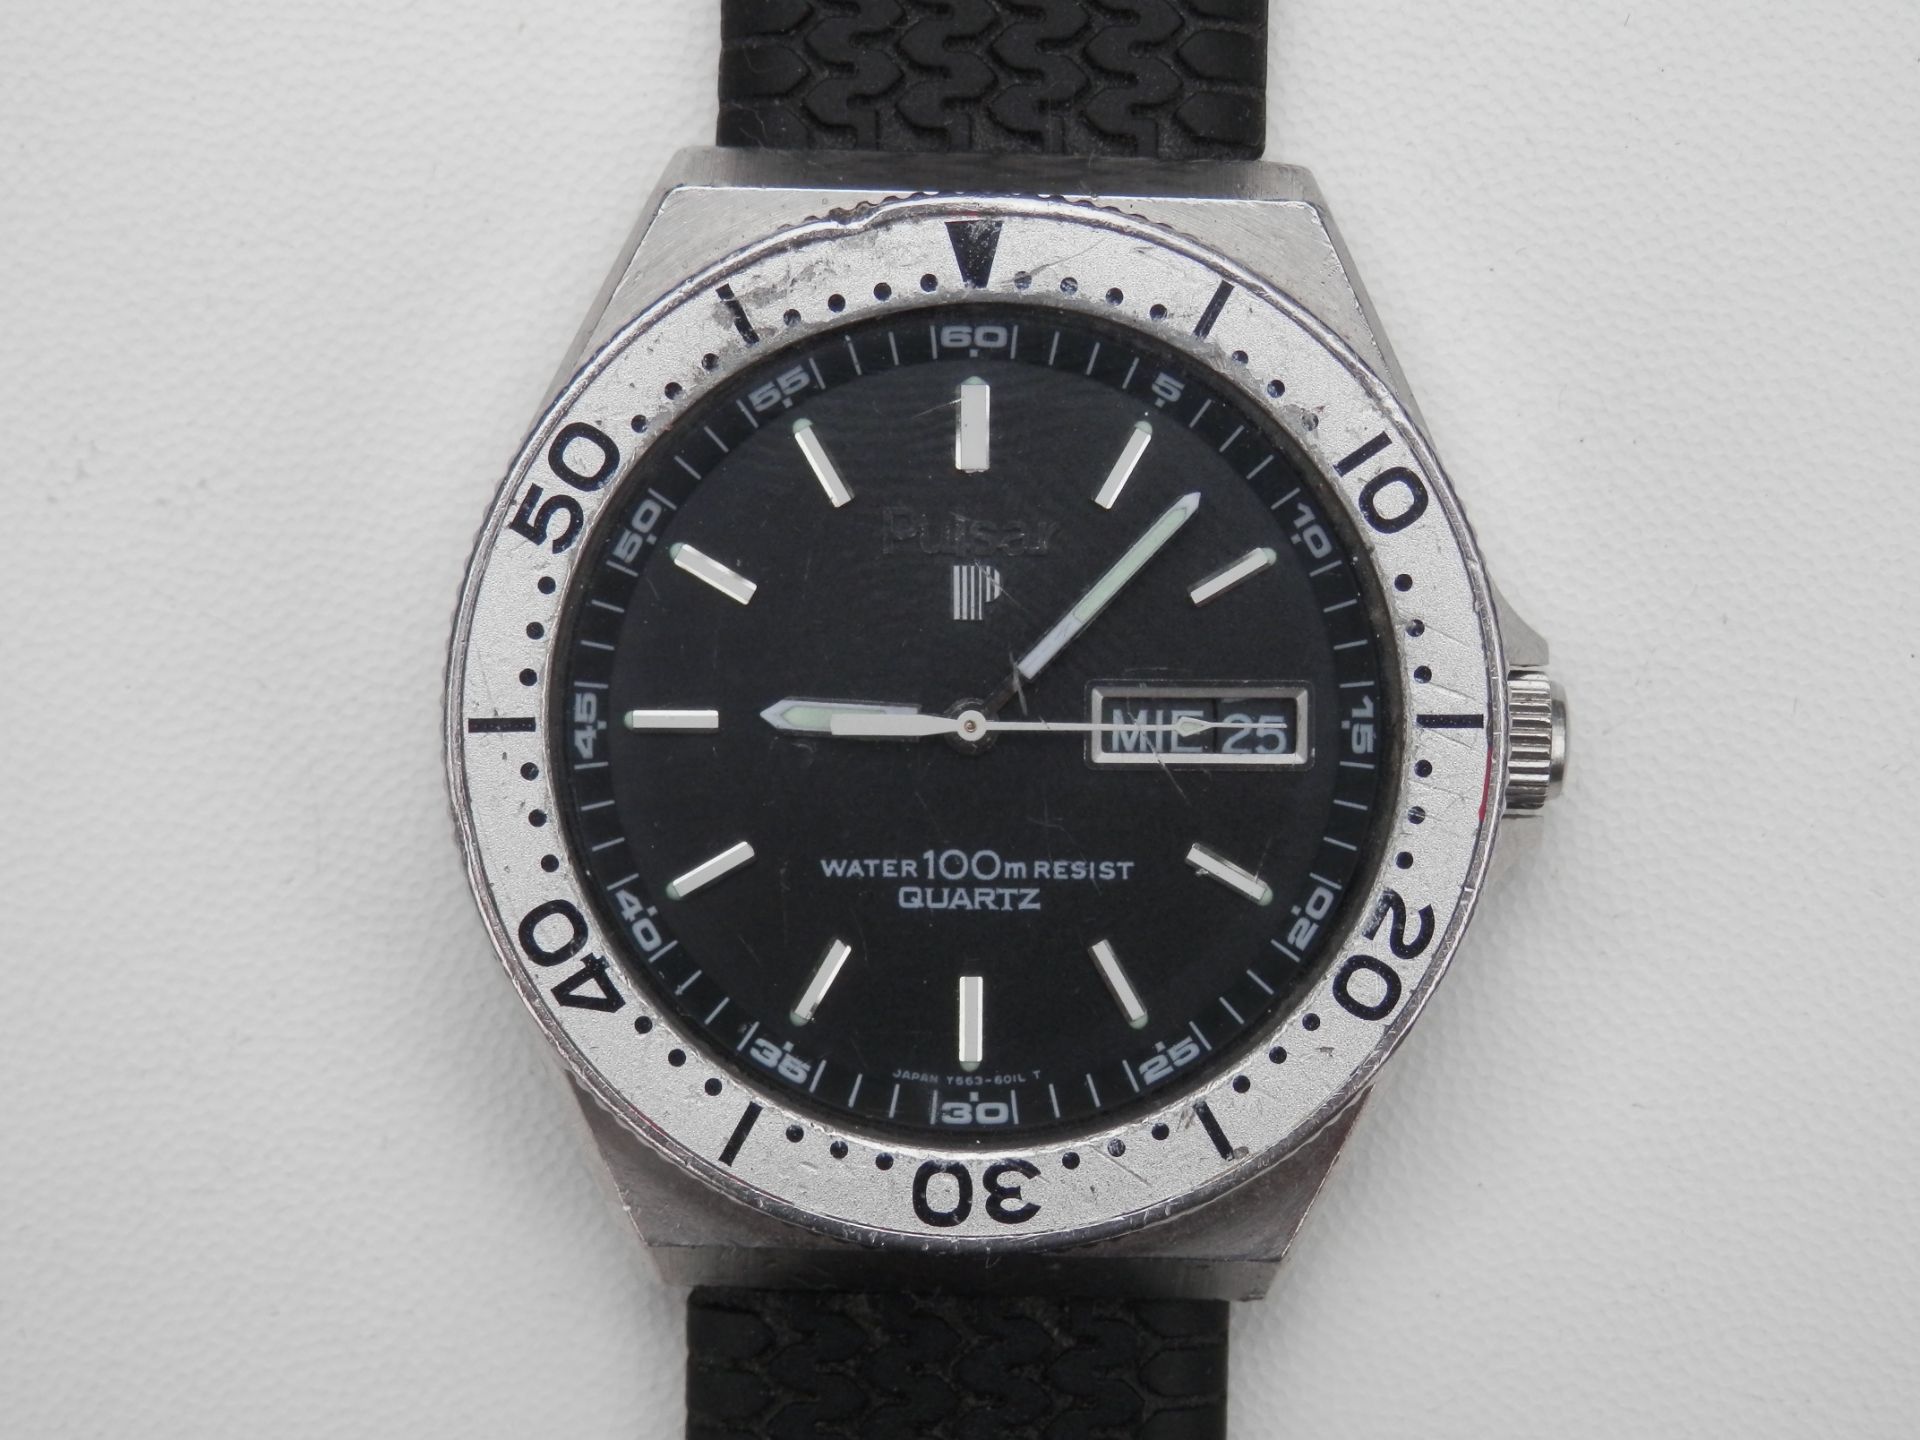 RARE GENTS 1980S PULSAR Y563 DIVERS STYLE 100M WATER RESISTANT QUARTZ DAY/DATE WATCH, WORKING. - Image 5 of 7